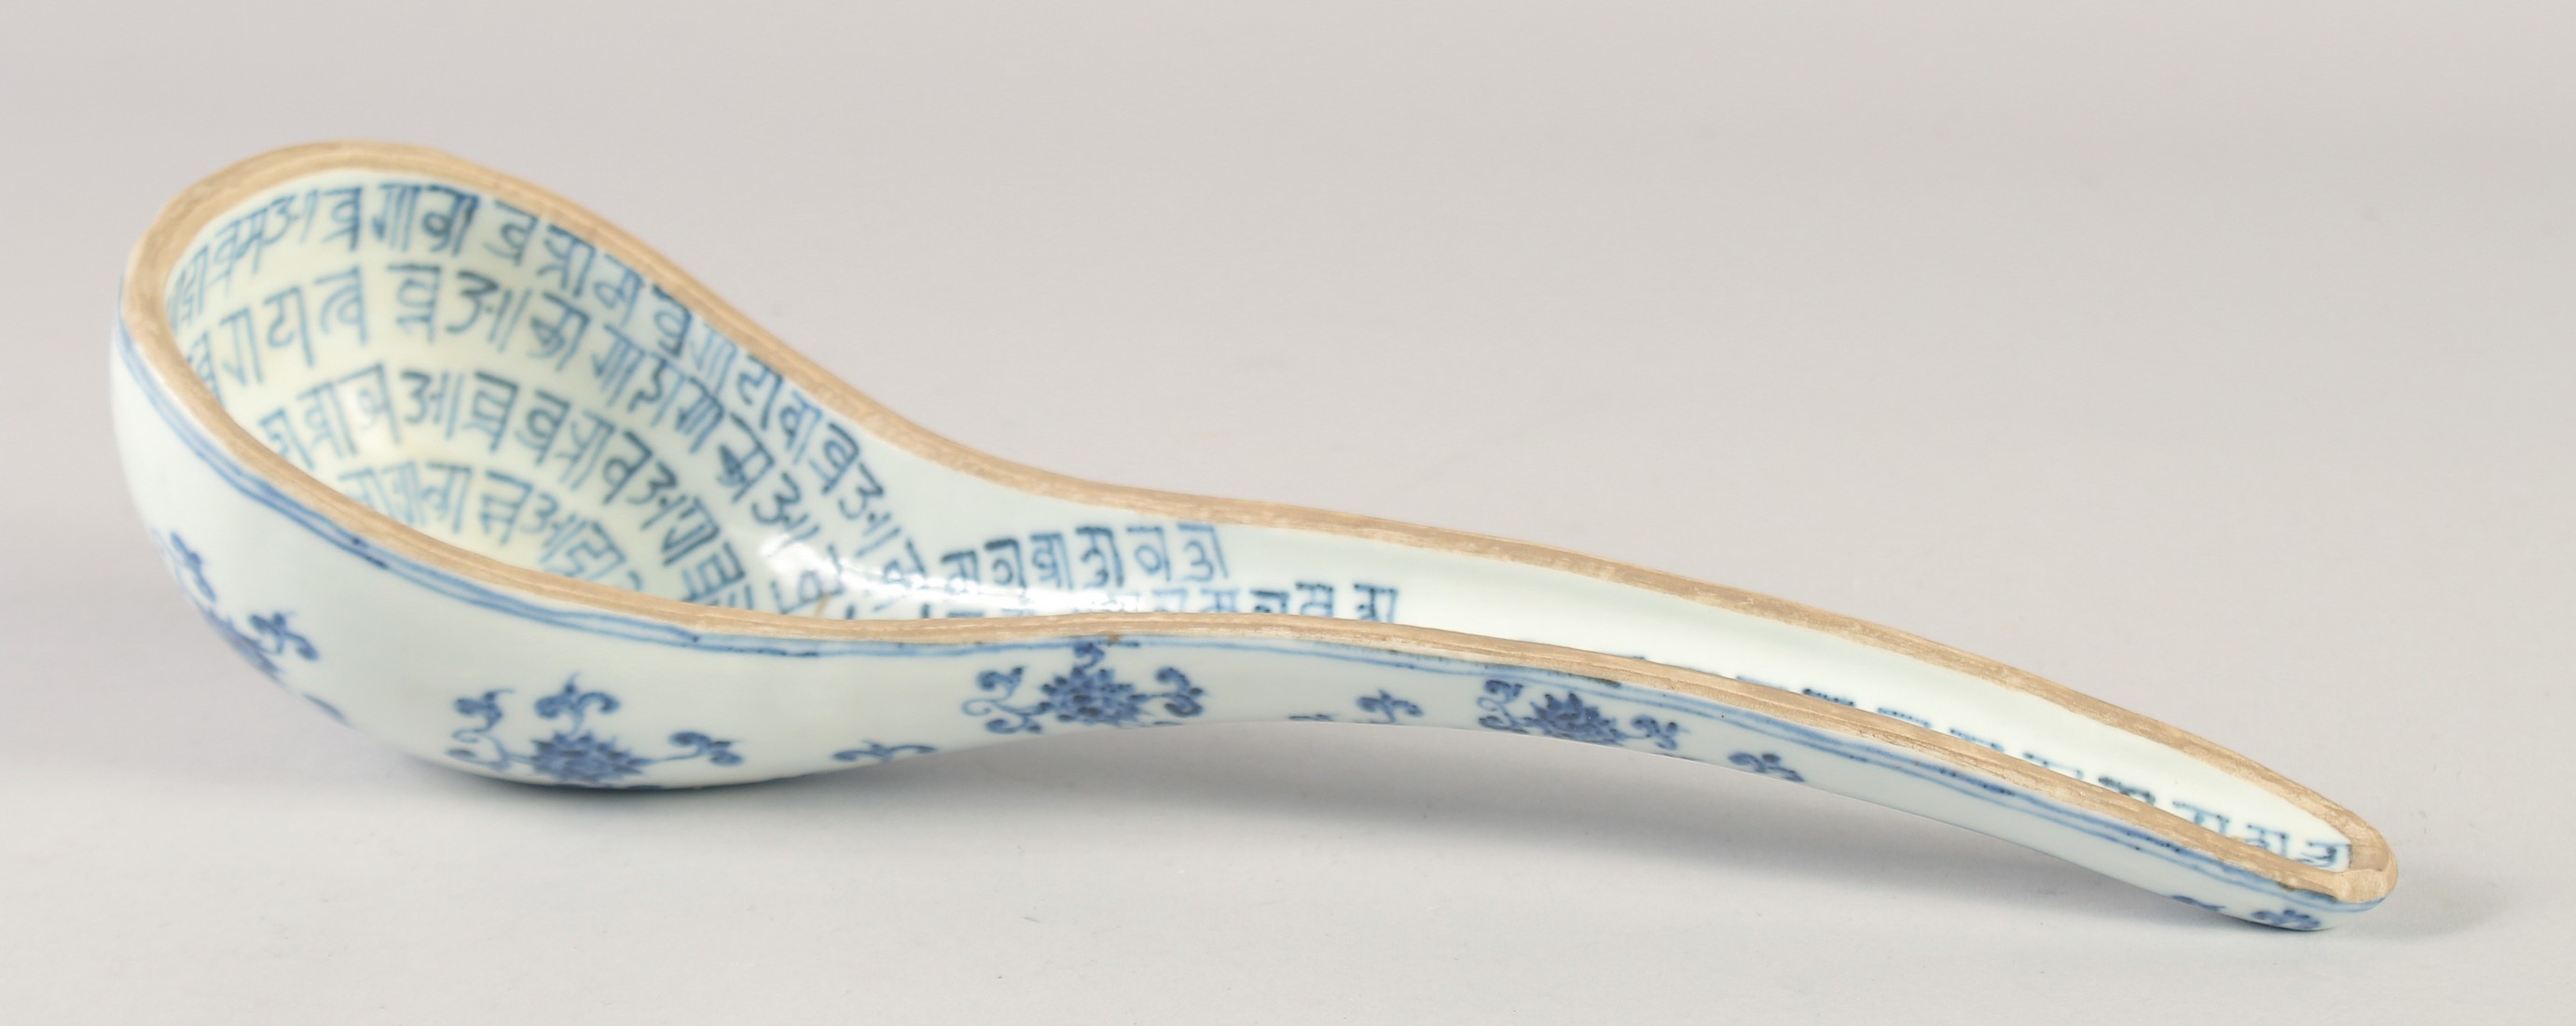 A LARGE CHINESE BLUE AND WHITE PORCELAIN LADLE, the interior with characters, bearing six-